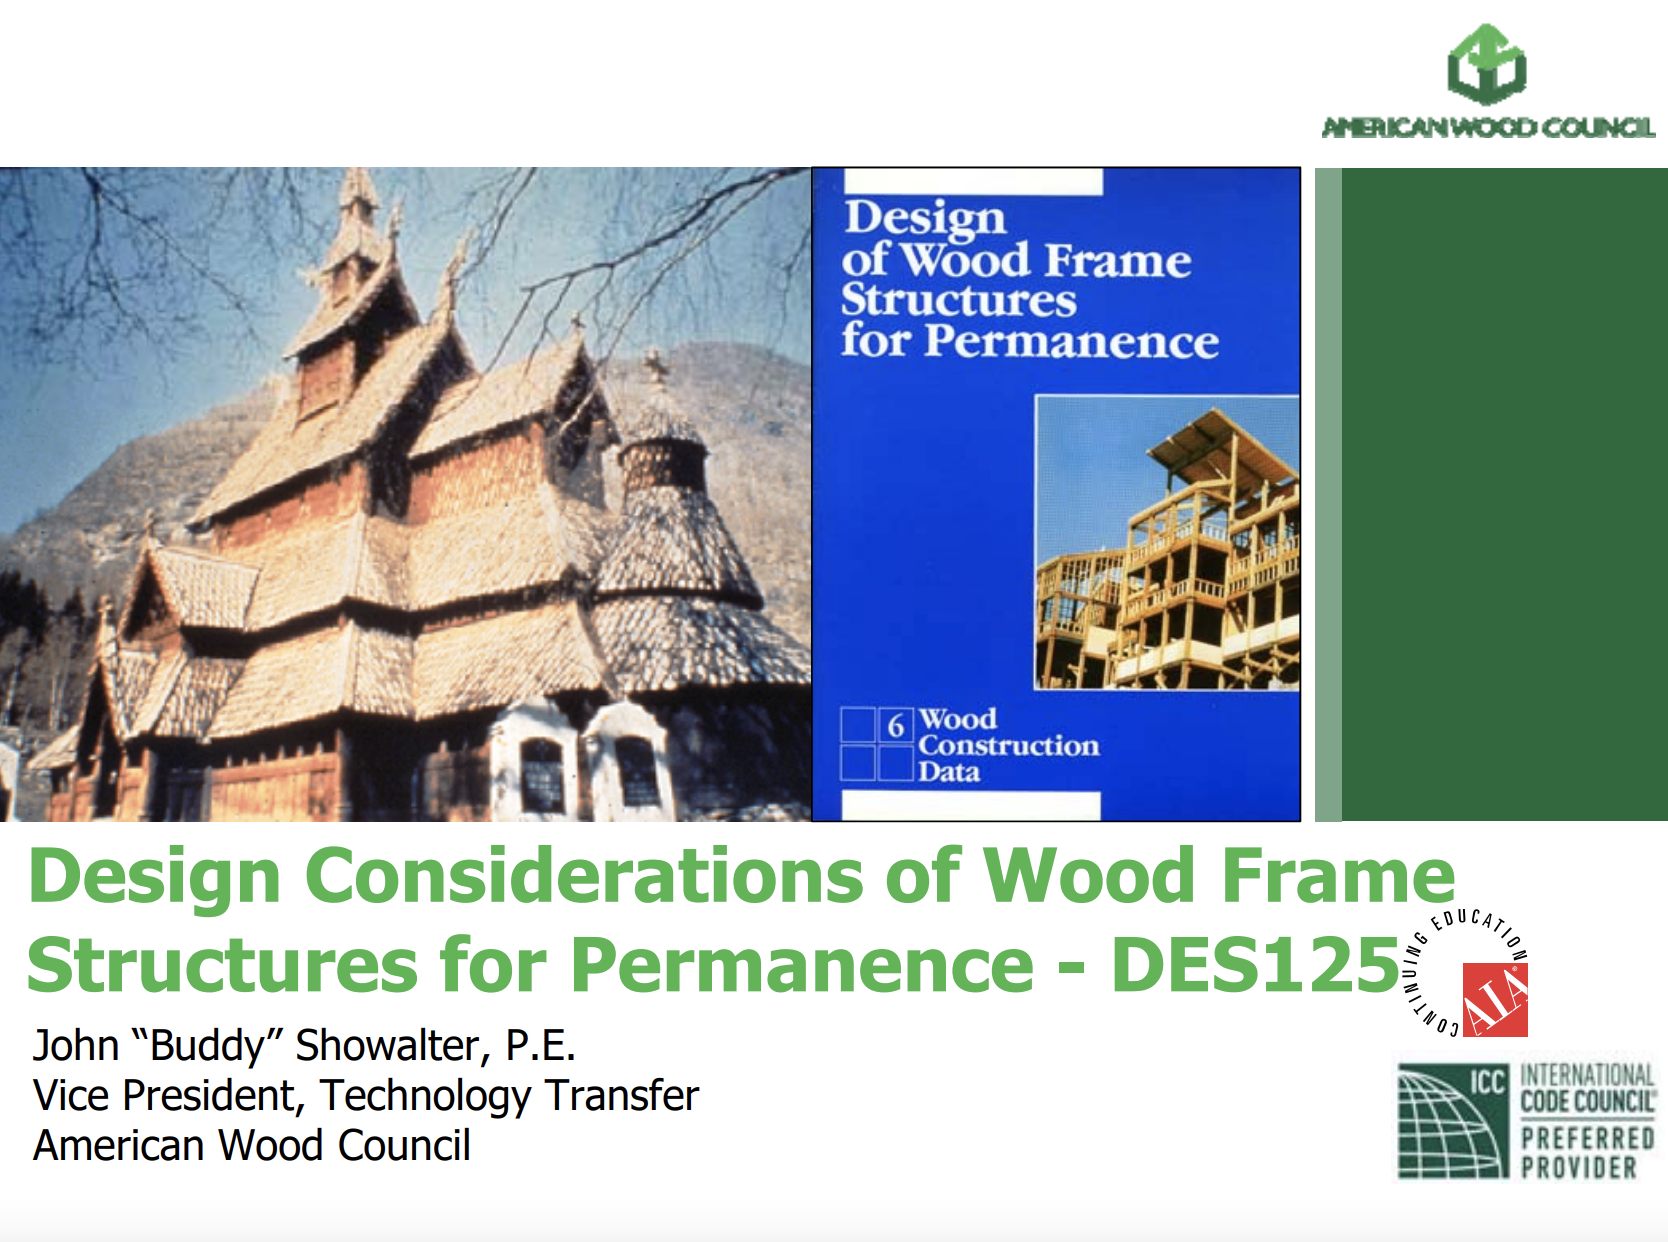 Design Considerations of Wood Frame Structures for Permanence